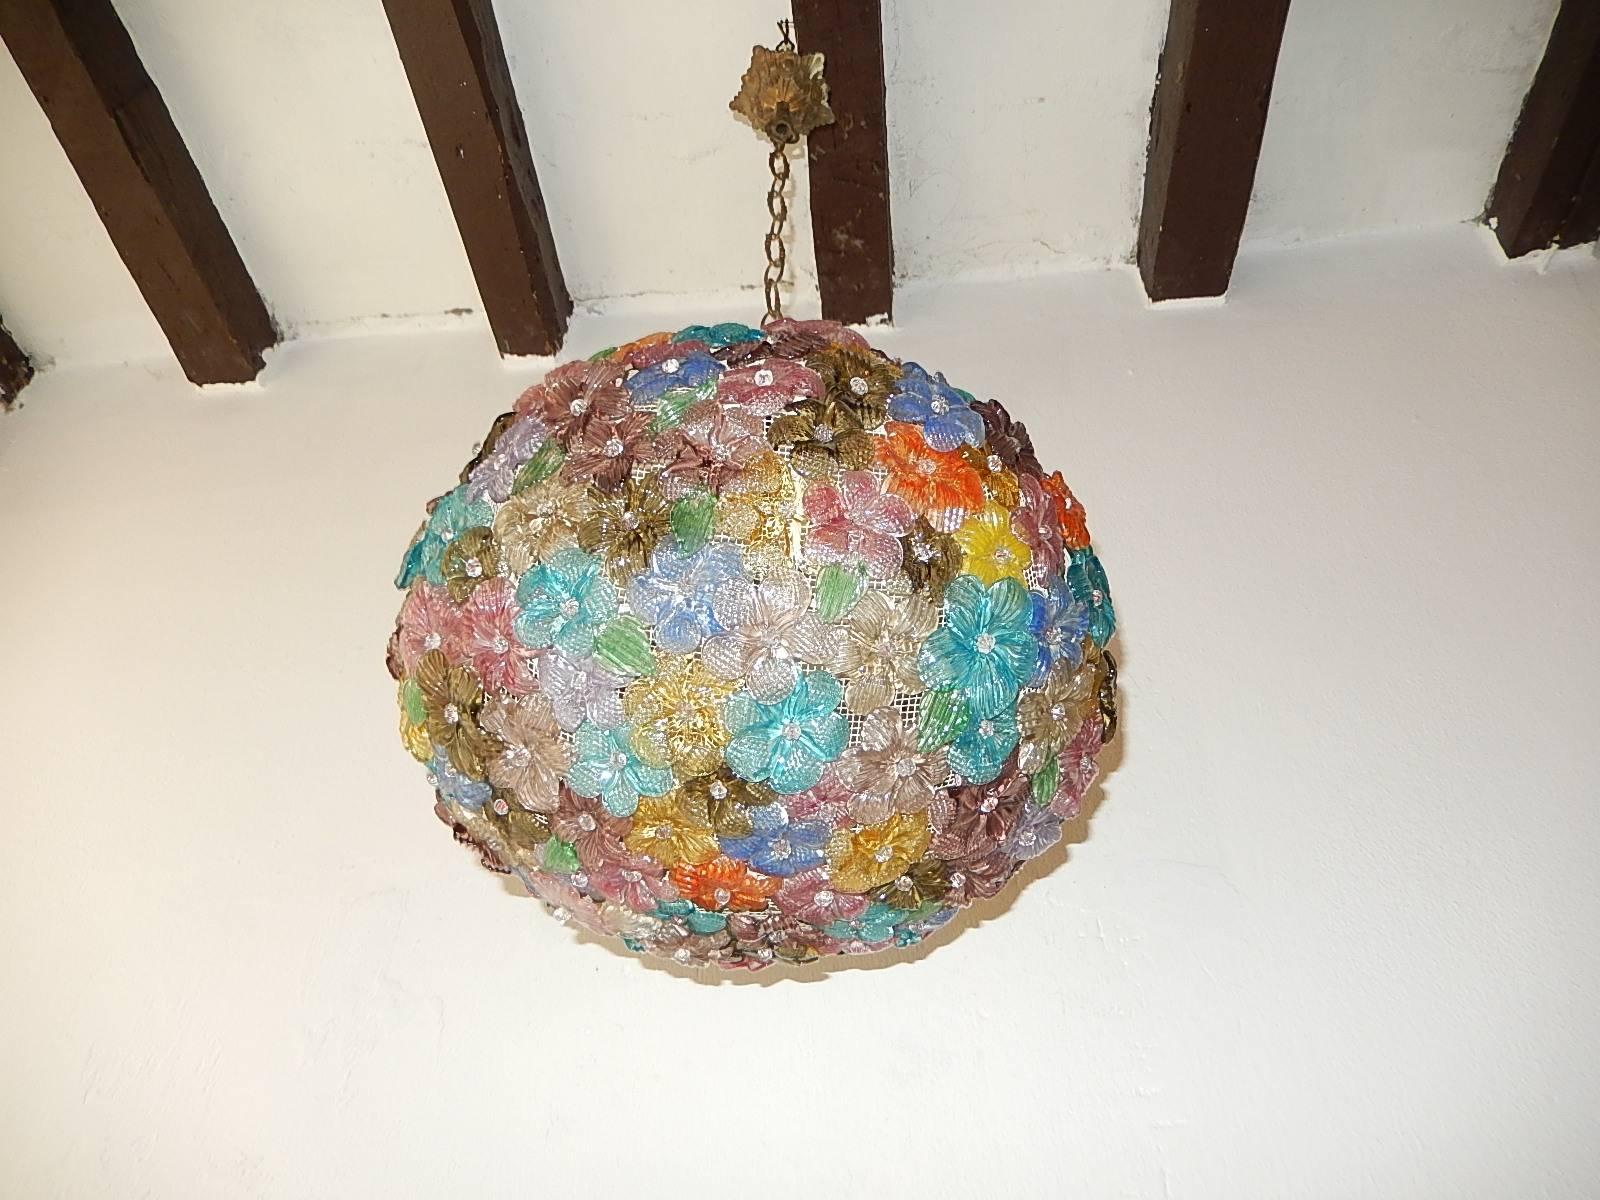 Housing three lights, will be rewired and ready to hang. Ball of Murano flowers in all shapes, sizes and colors with glass pins. Free priority shipping from Italy. Adding another 20 inches of original chain and canopy.